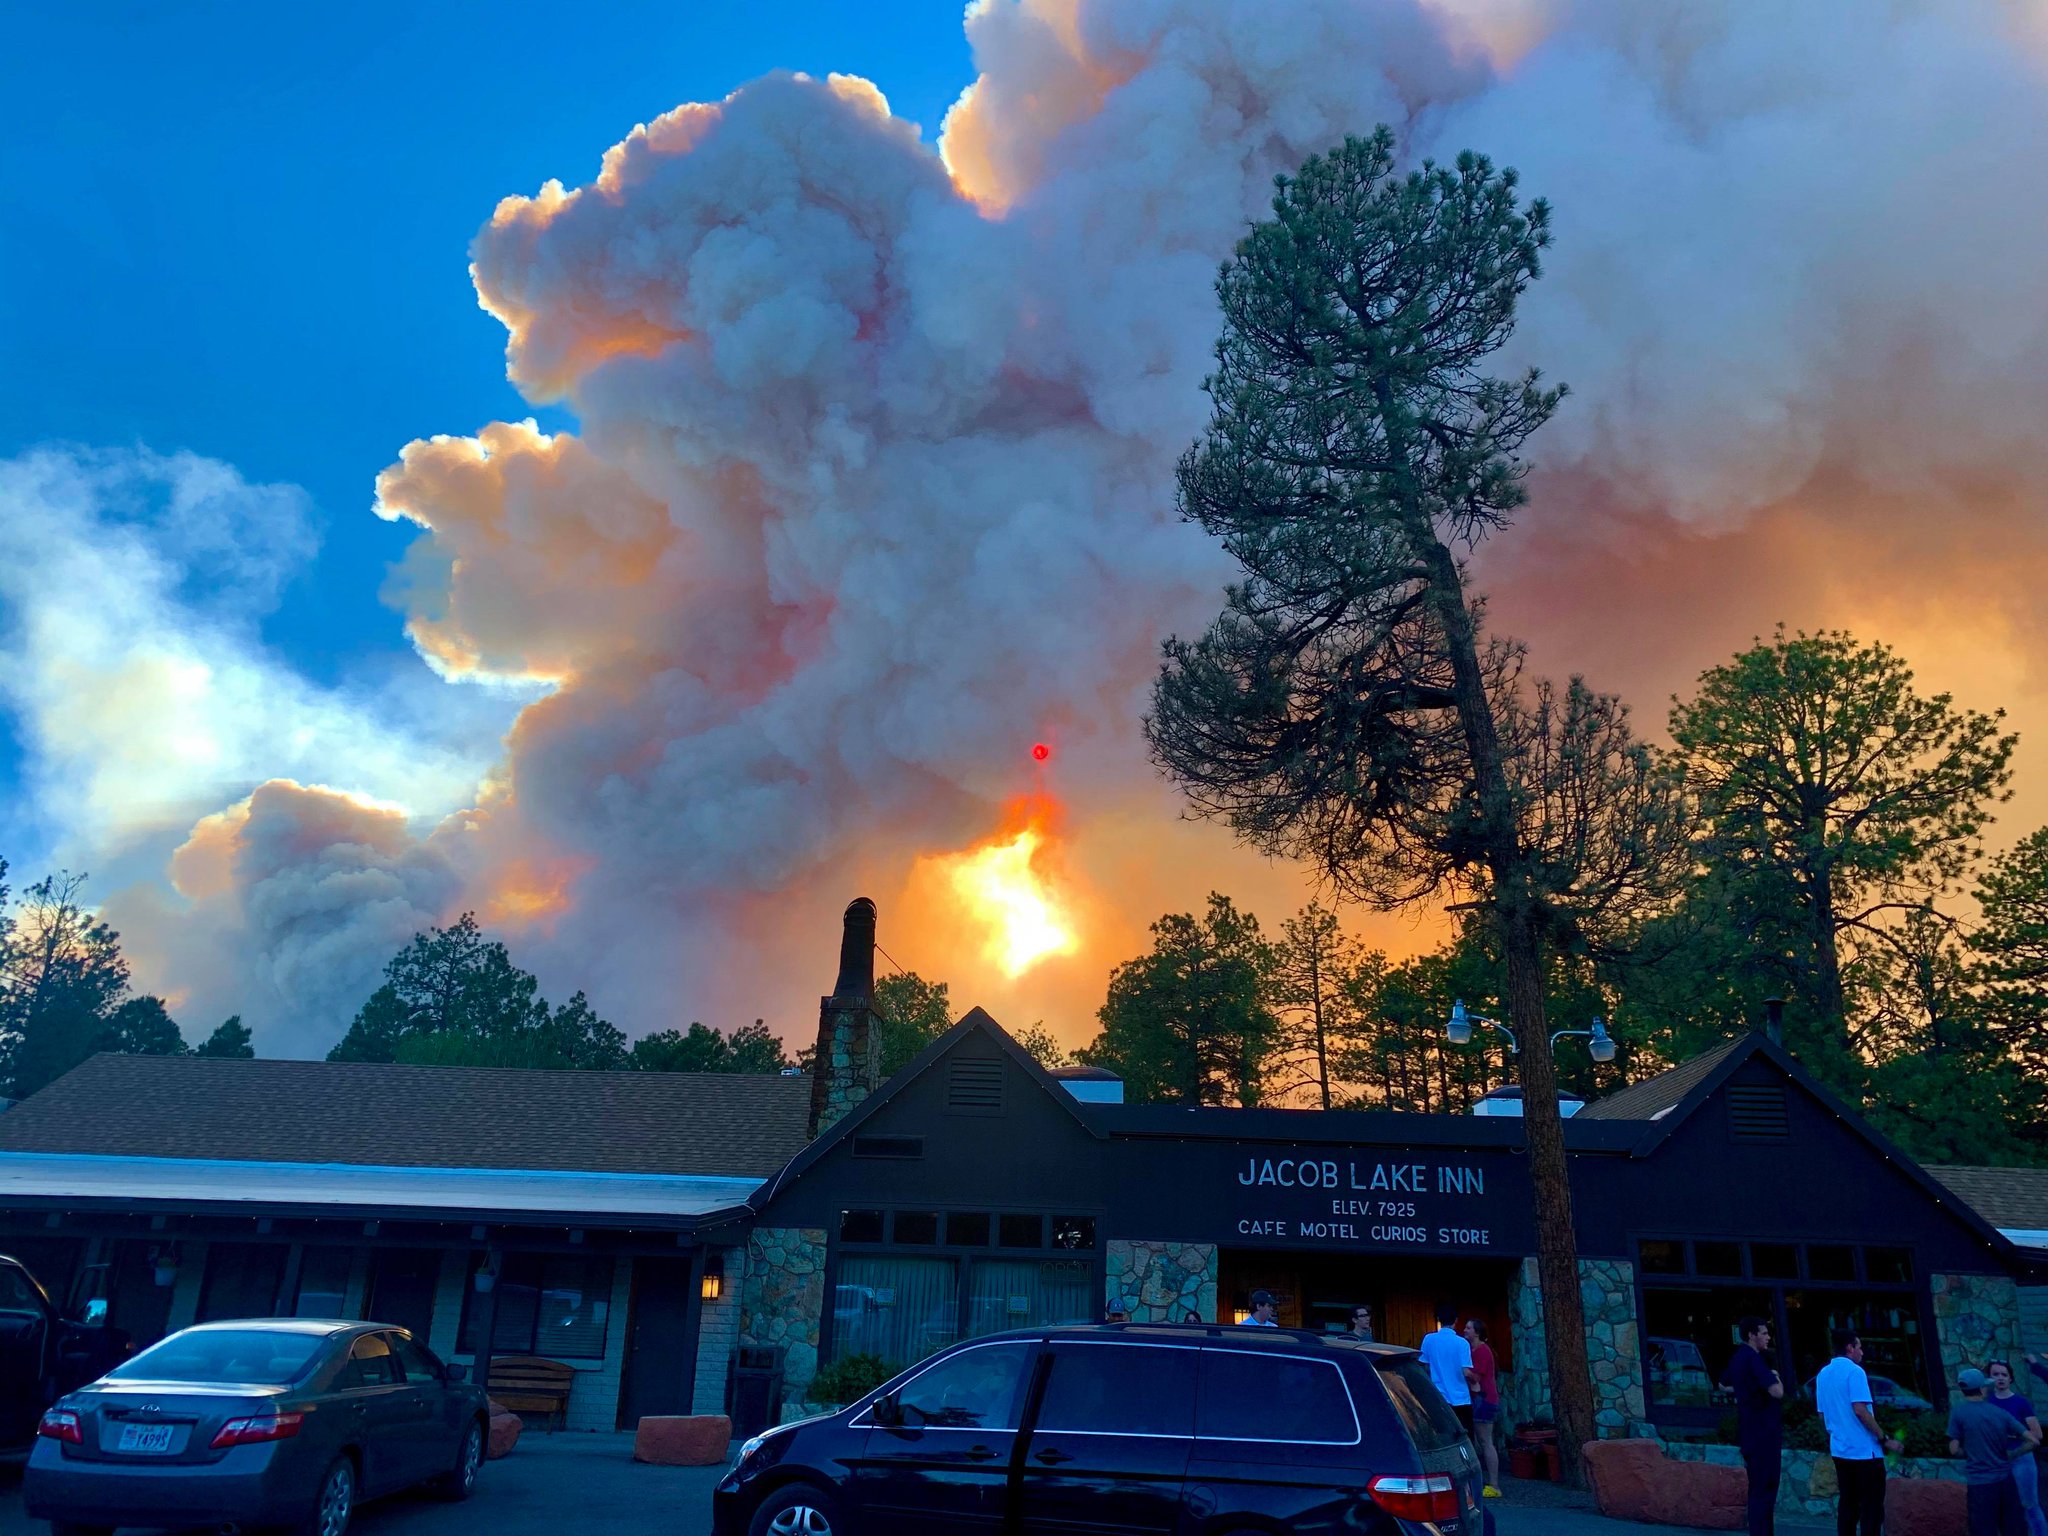 A large smoke plume could be seen from the town of Jacob Lake during the afternoon of Saturday June 13th, 2020. Photo Credit: Brian Schnee